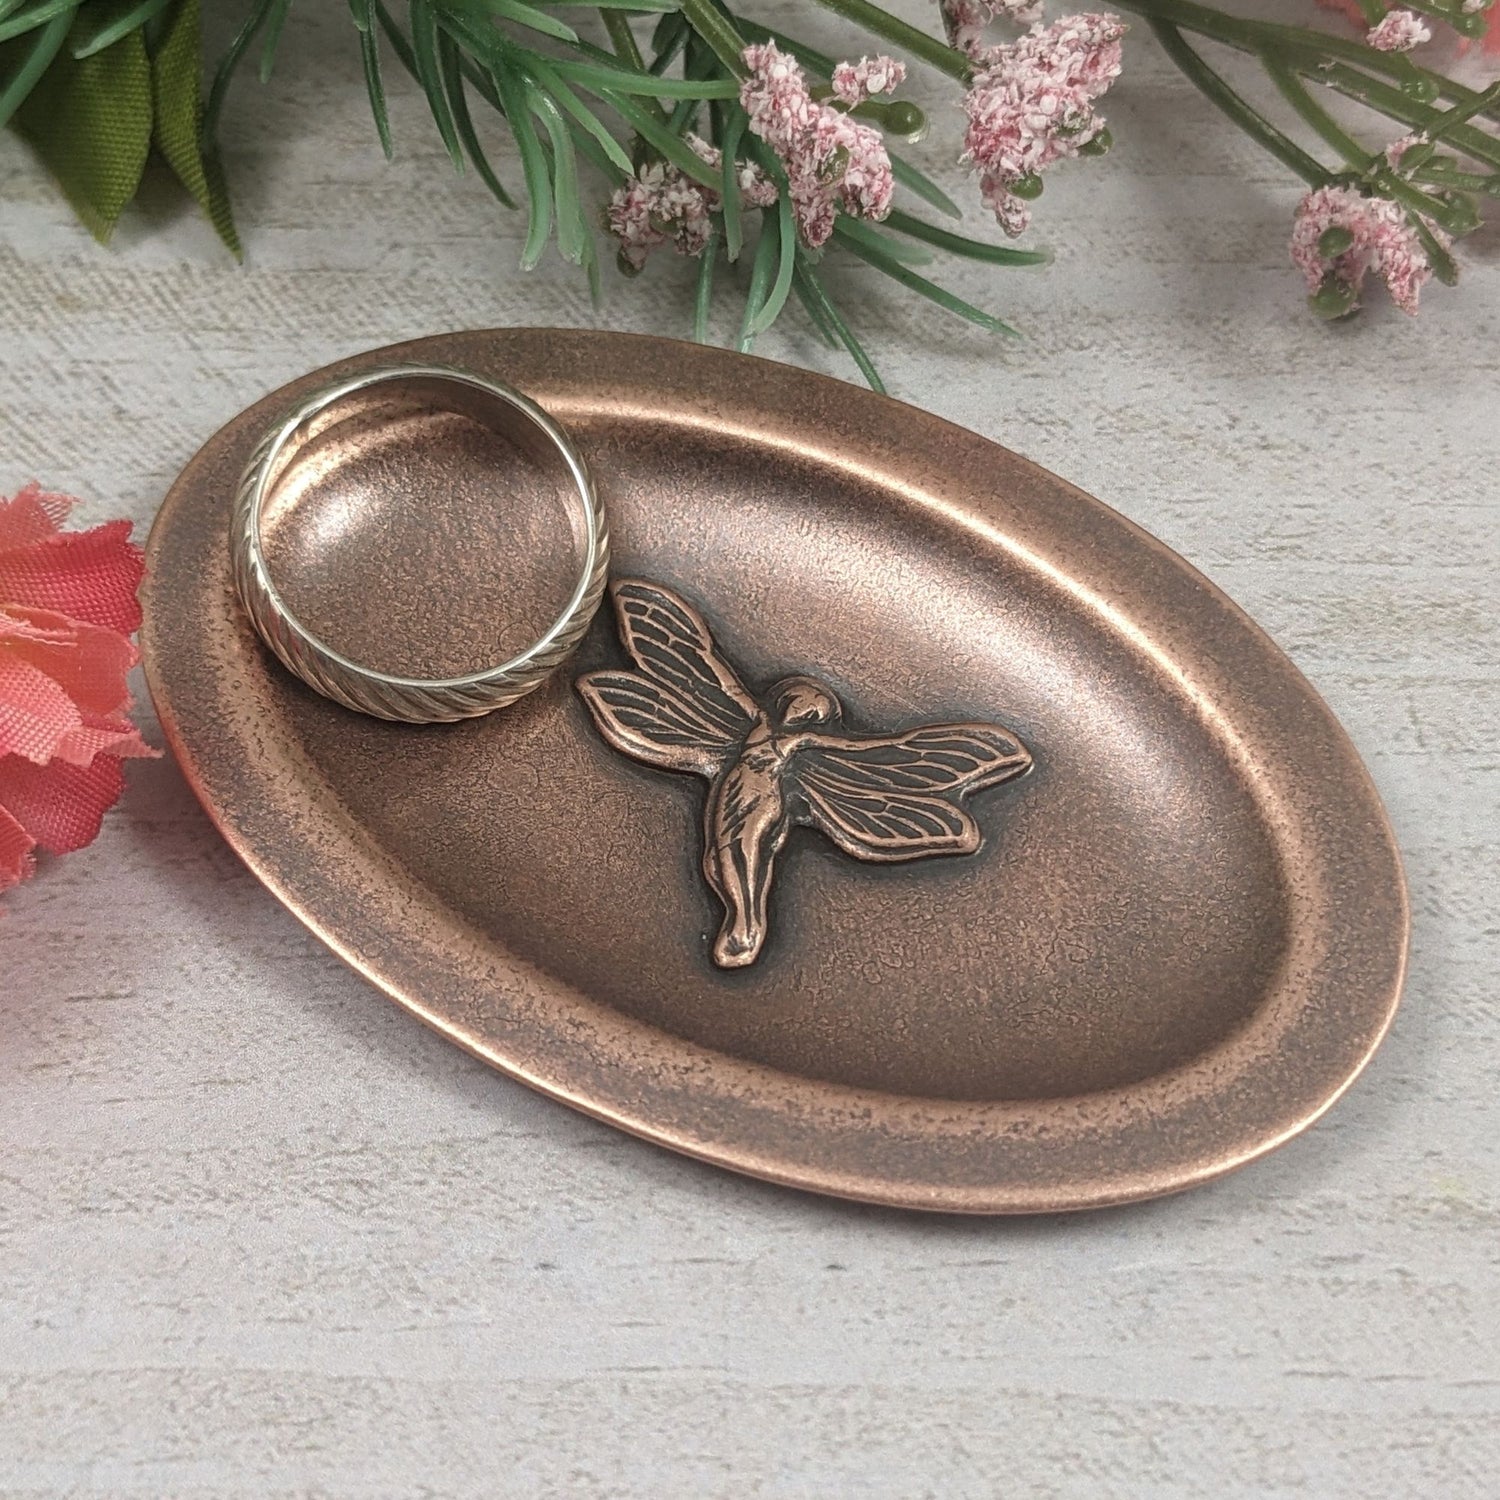 Oval copper ring dish. In the middle is a three dimensional fairy in flight. Her wings have detailed webbing pattern and you can see the draping on her dress.  The dish has a small lip around the edge. Staged with a ring in the dish and flowers in the background.